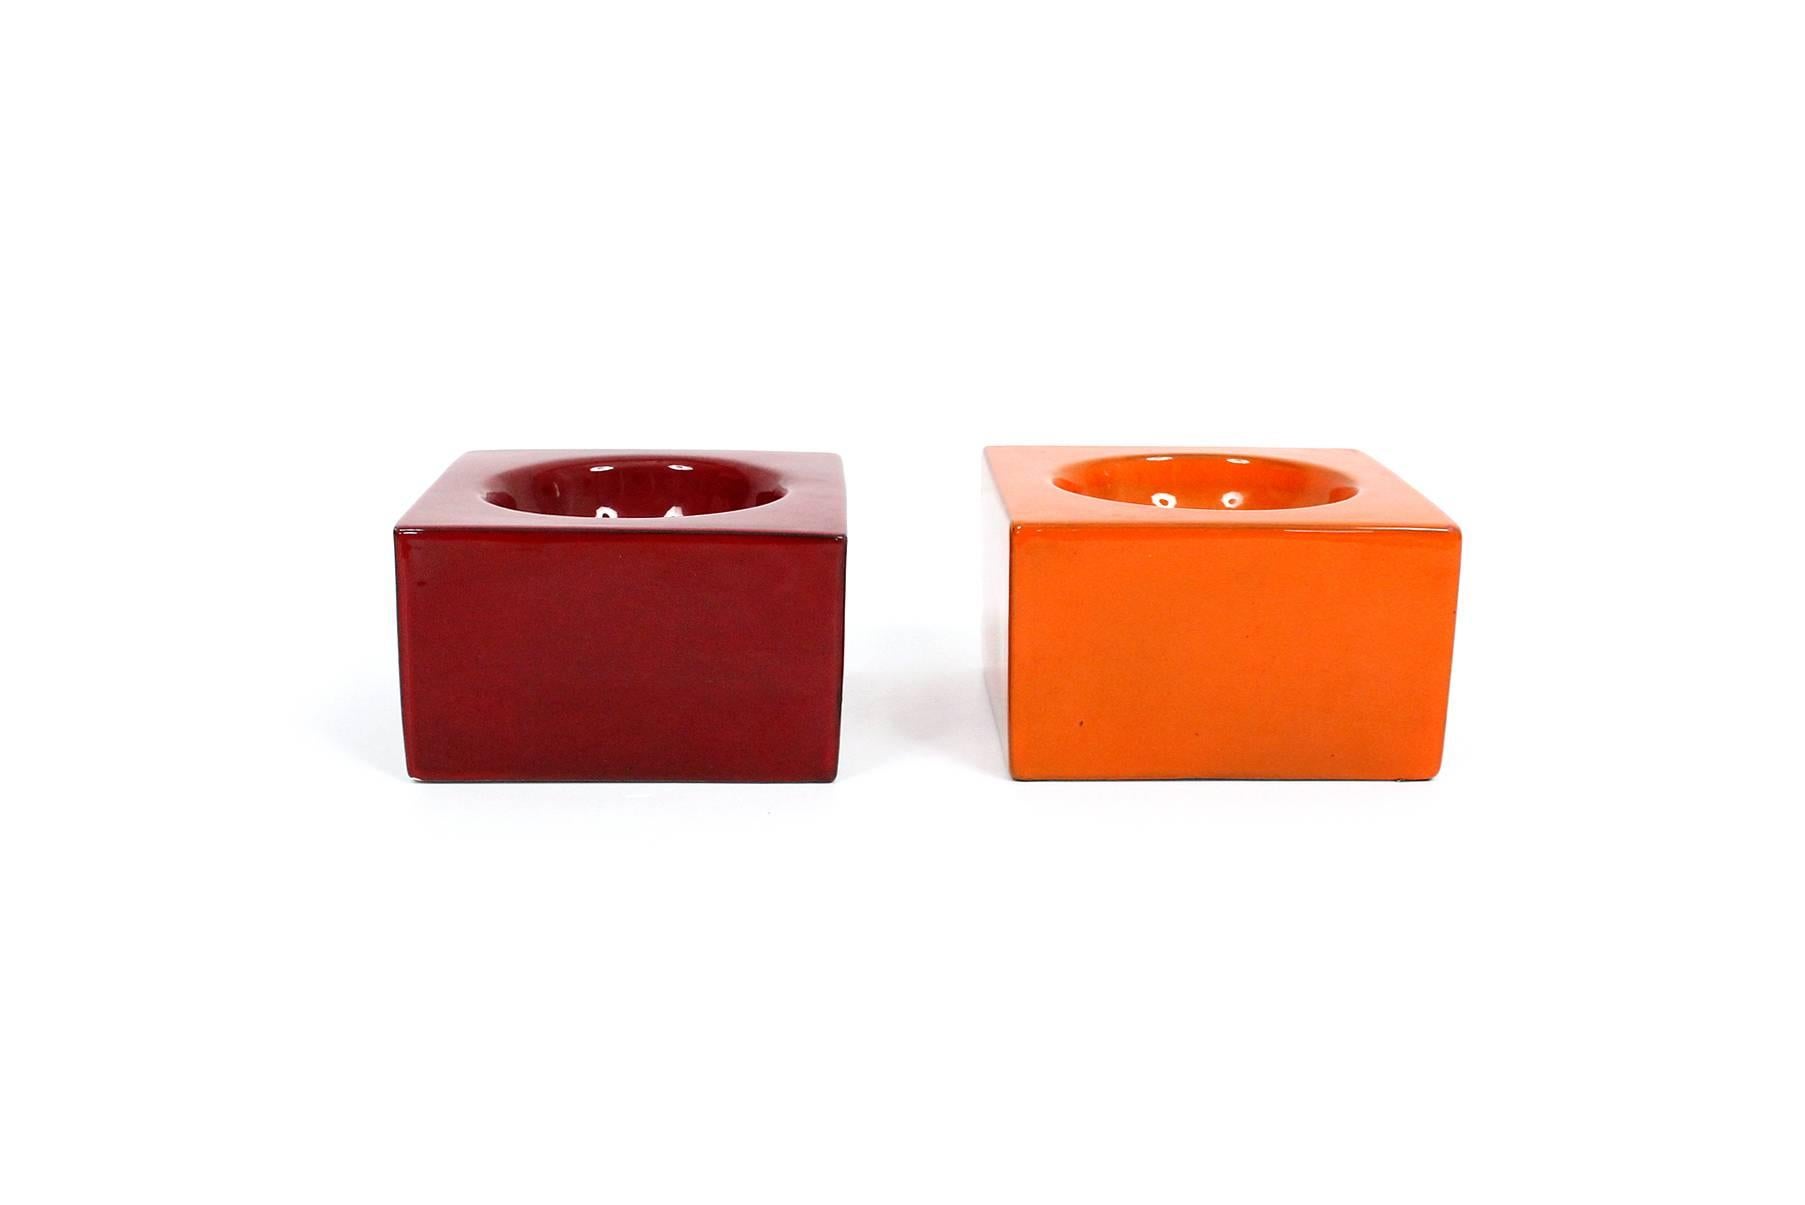 Ettore Sottsass for Il Sestante pair of ceramic bowls or catch-alls. Striking glaze and minimalist design. This pair of bowls are Model No. 444. Both examples signed 